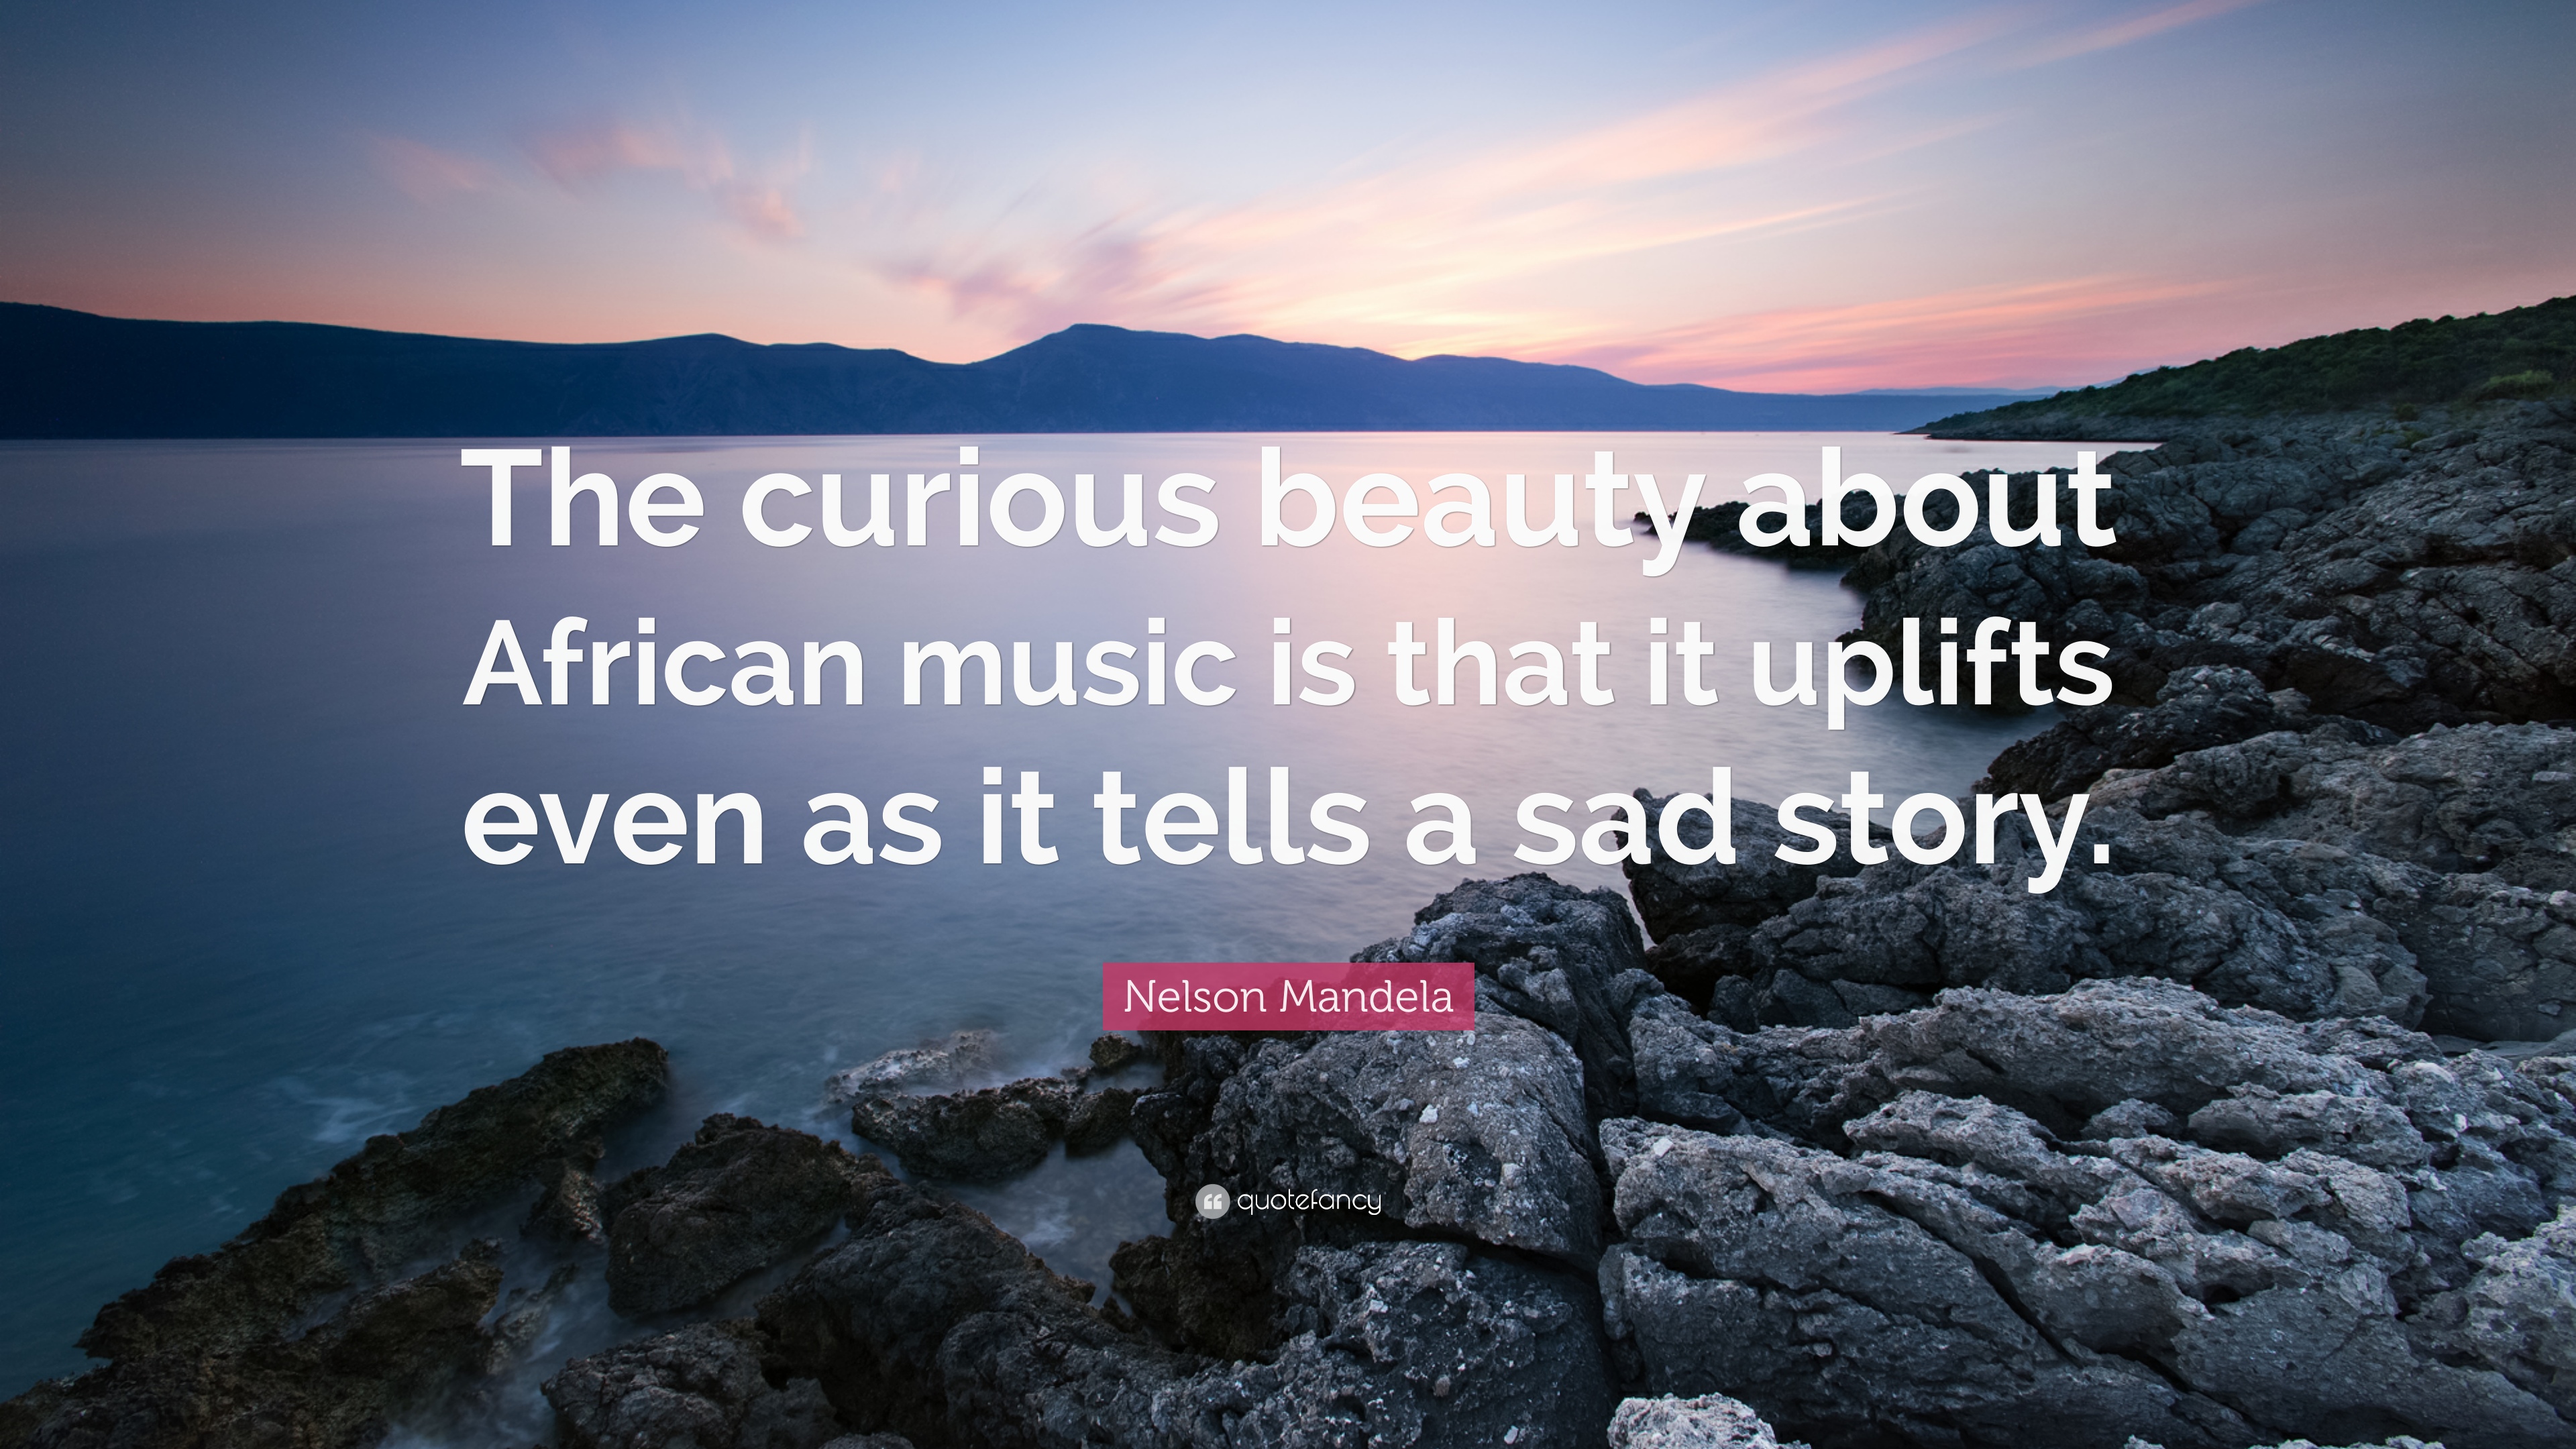 Nelson Mandela Quote: “The curious beauty about African music is